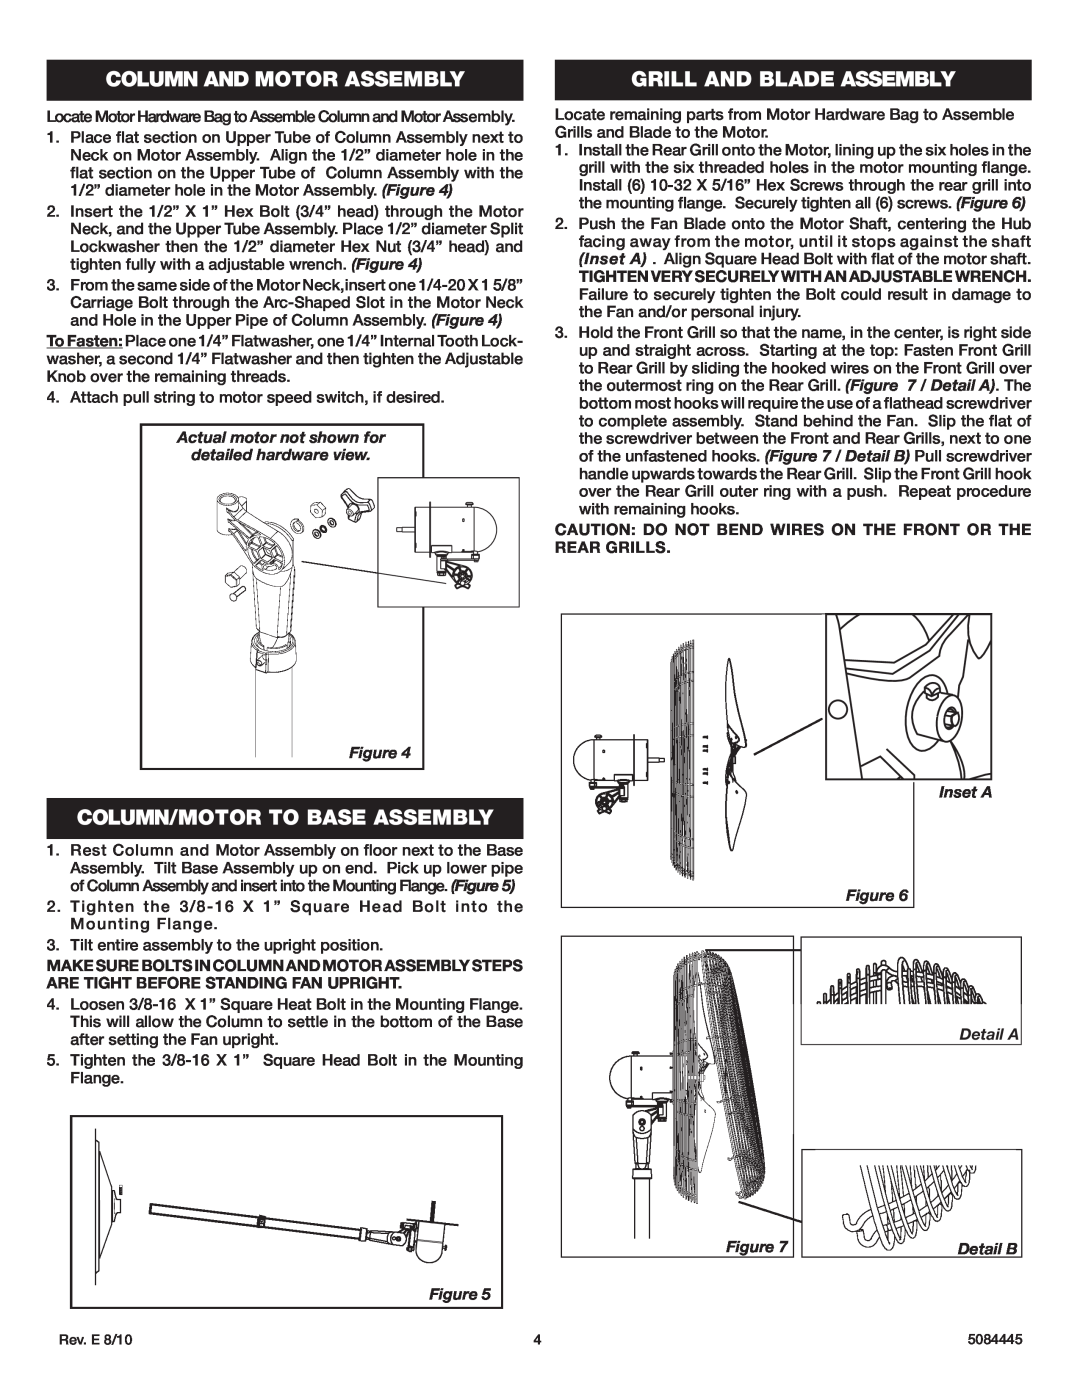 Lasko 3138 instruction sheet Column And Motor Assembly, Column/Motor To Base Assembly, Grill And Blade Assembly 